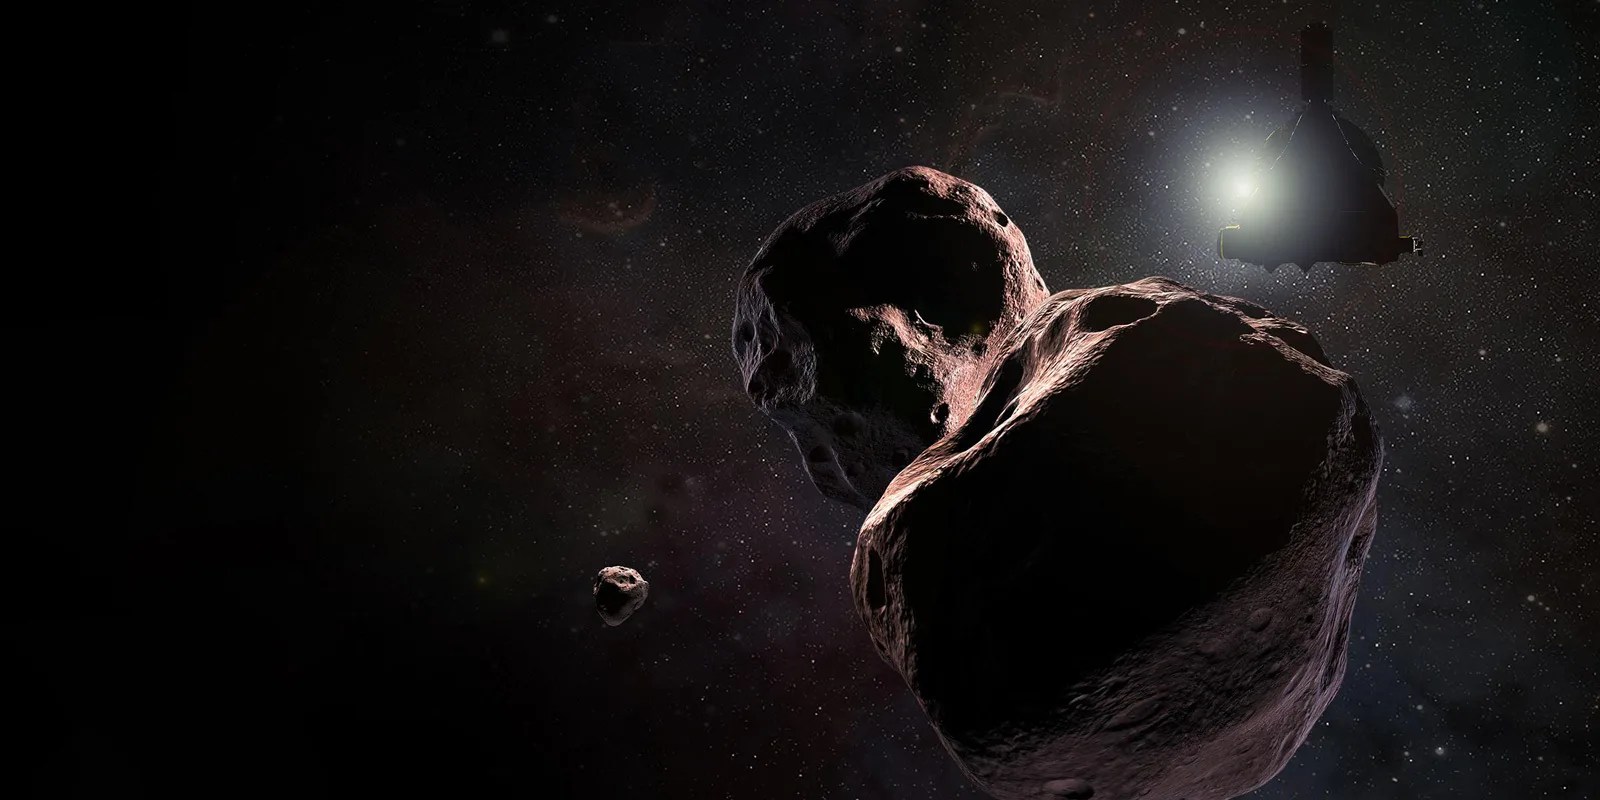 Illustration of spacecraft near a giant space rock far from the Sun.